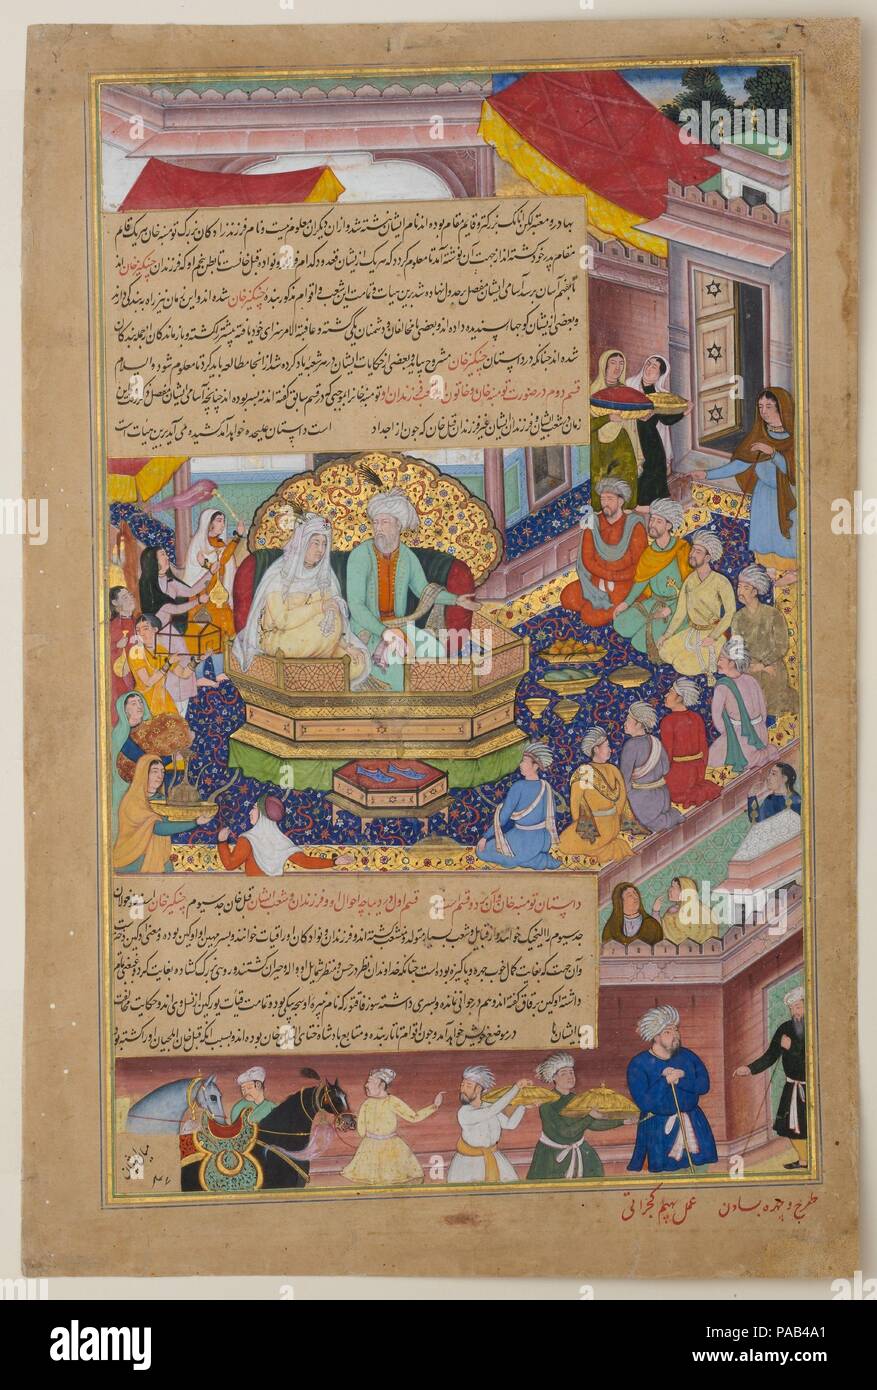 'Tumanba Khan, His Wife, and His Nine Sons', Folio from a Chingiznama (Book of Genghis Khan). Artist: Basawan (Indian, active ca. 1556-1600); Bhim Gujarati (active 1590s). Dimensions: Page: 15 x 10 in. (38.1 x 25.4 cm). Date: ca. 1596.  The text of the Chingiznama records the life of the legendary conqueror Chingiz Khan (Genghis Khan) and his family. The emperor Akbar (r. 1556-1605)  commissioned many historical manuscripts in the 1590s, but because the Mughals claimed descent from Genghis Khan, this book must have had particular resonance for him. This illustration depicts the ruler Tumanba K Stock Photo